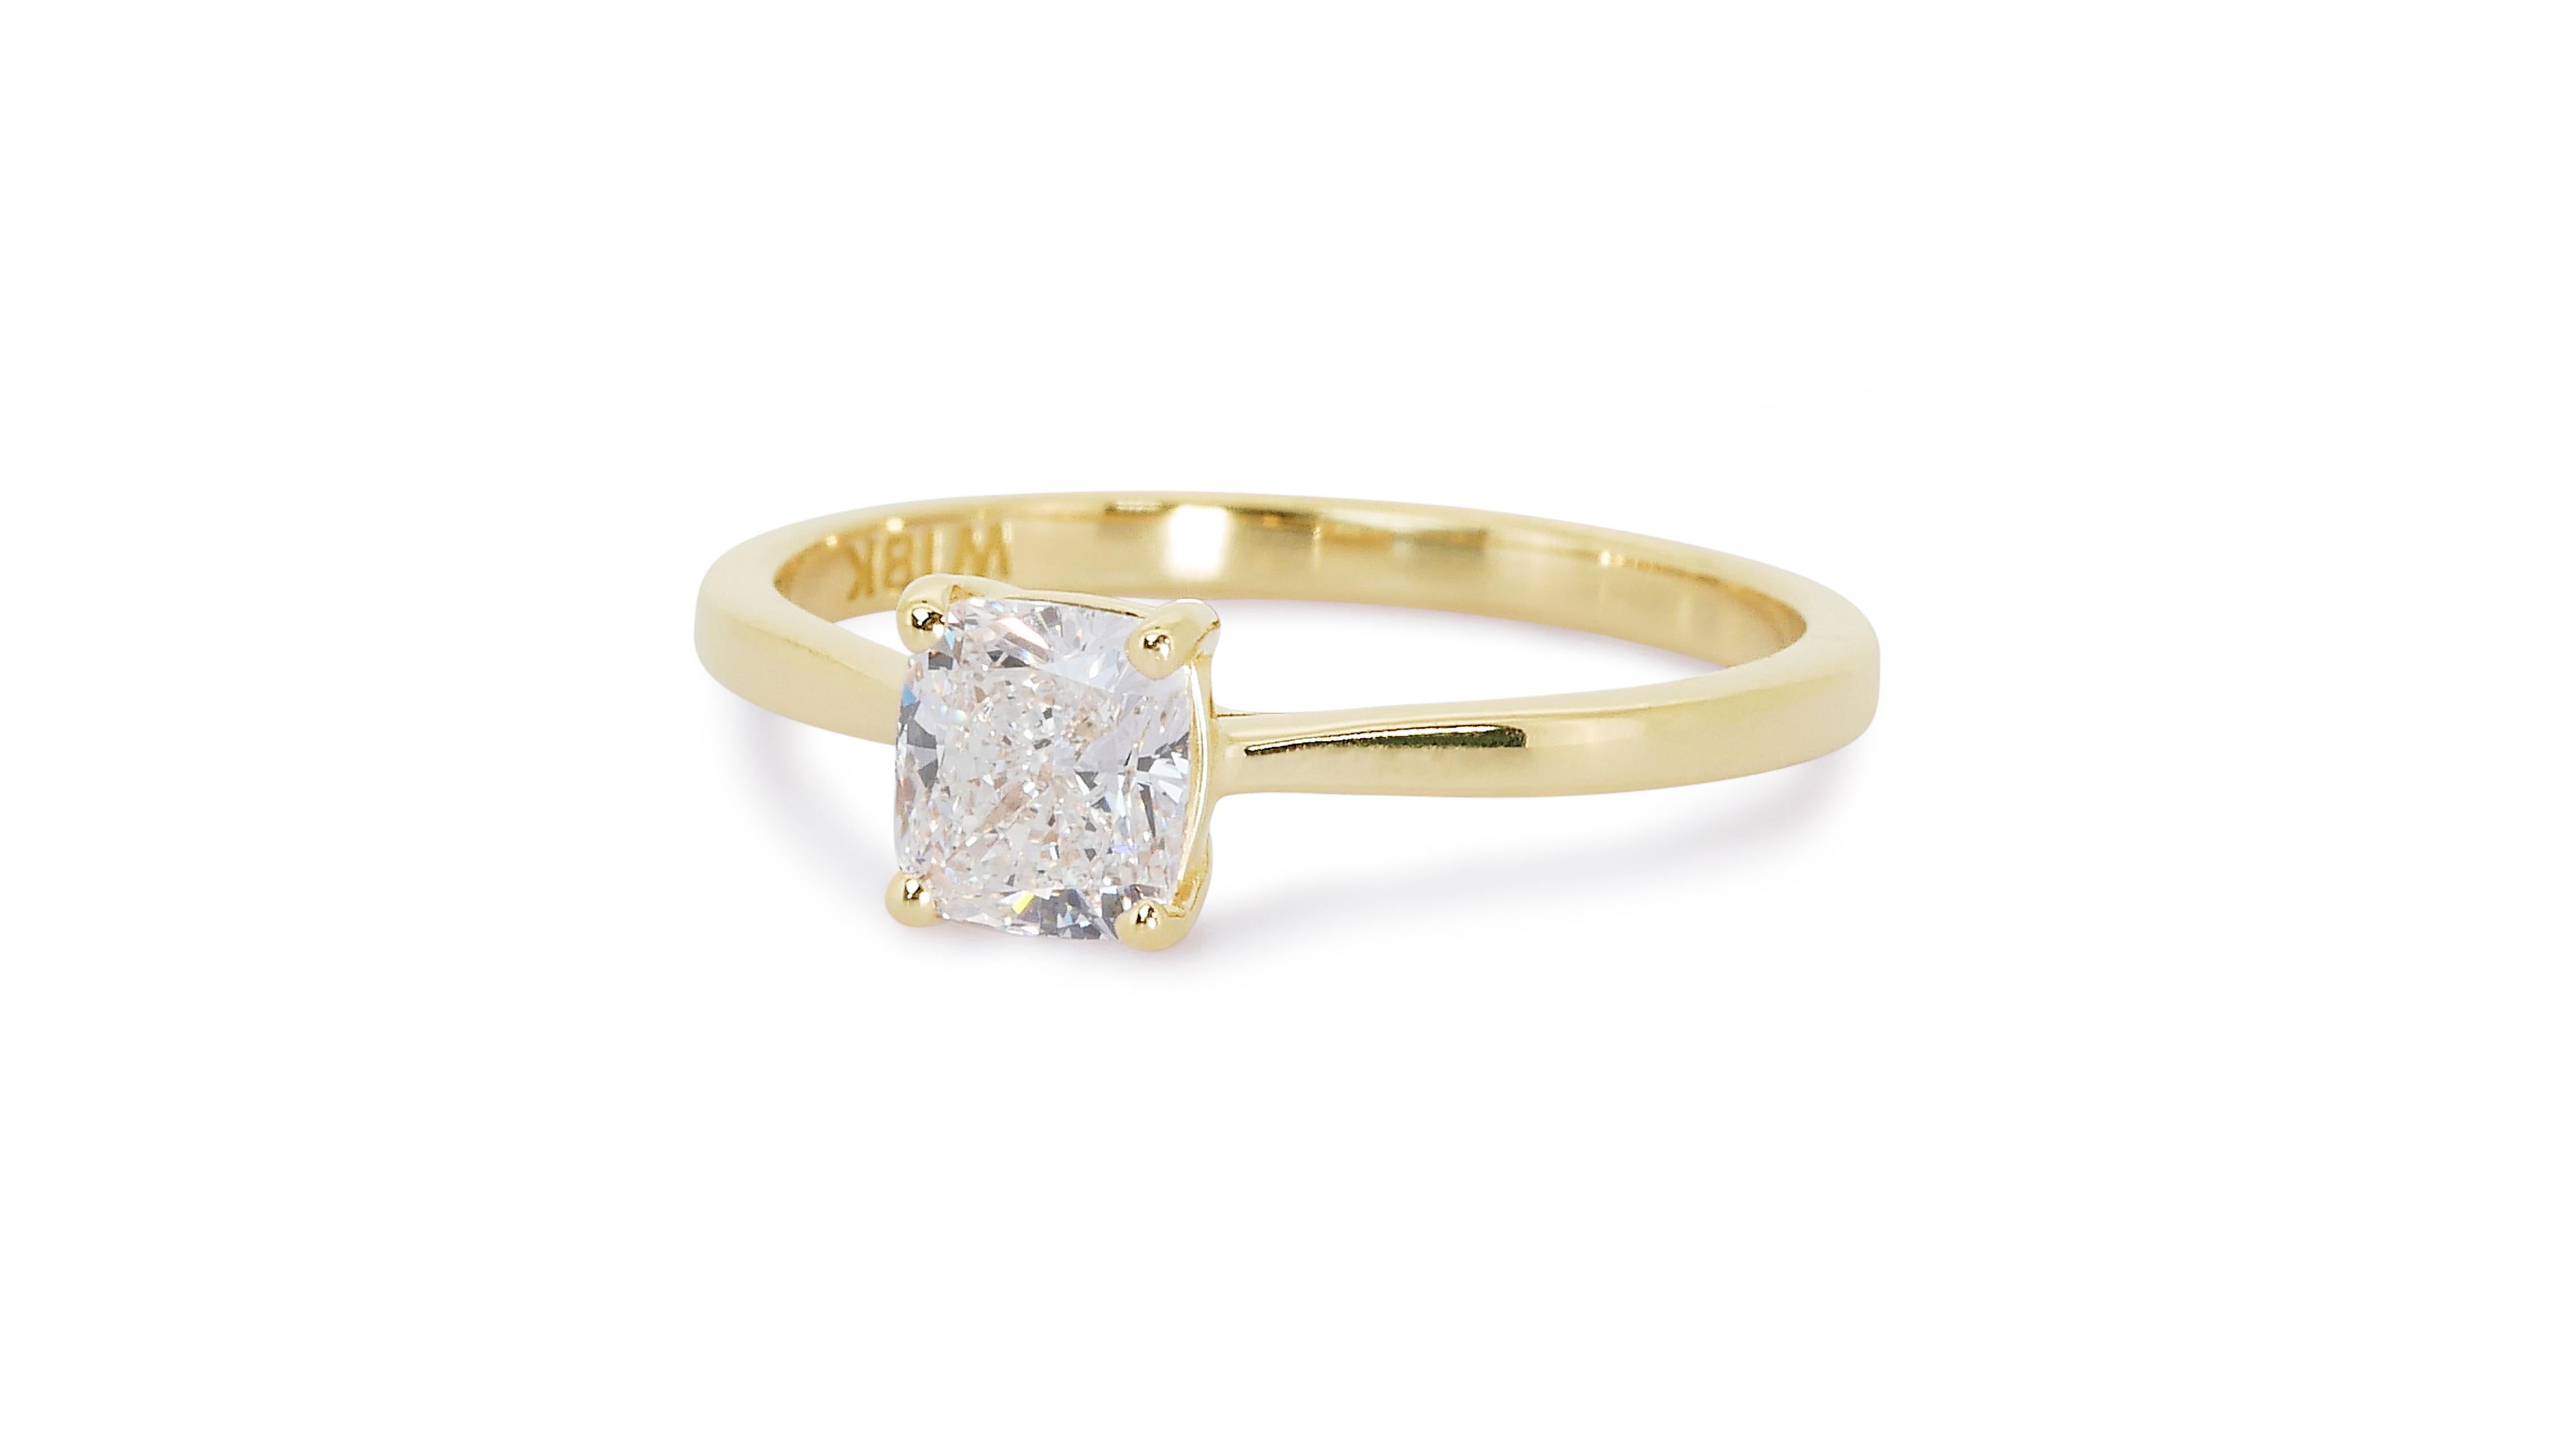 Cushion Cut Glamorous 18k Yellow Gold Solitaire Ring w/ 0.80 ct Natural Diamonds IGI Cert For Sale